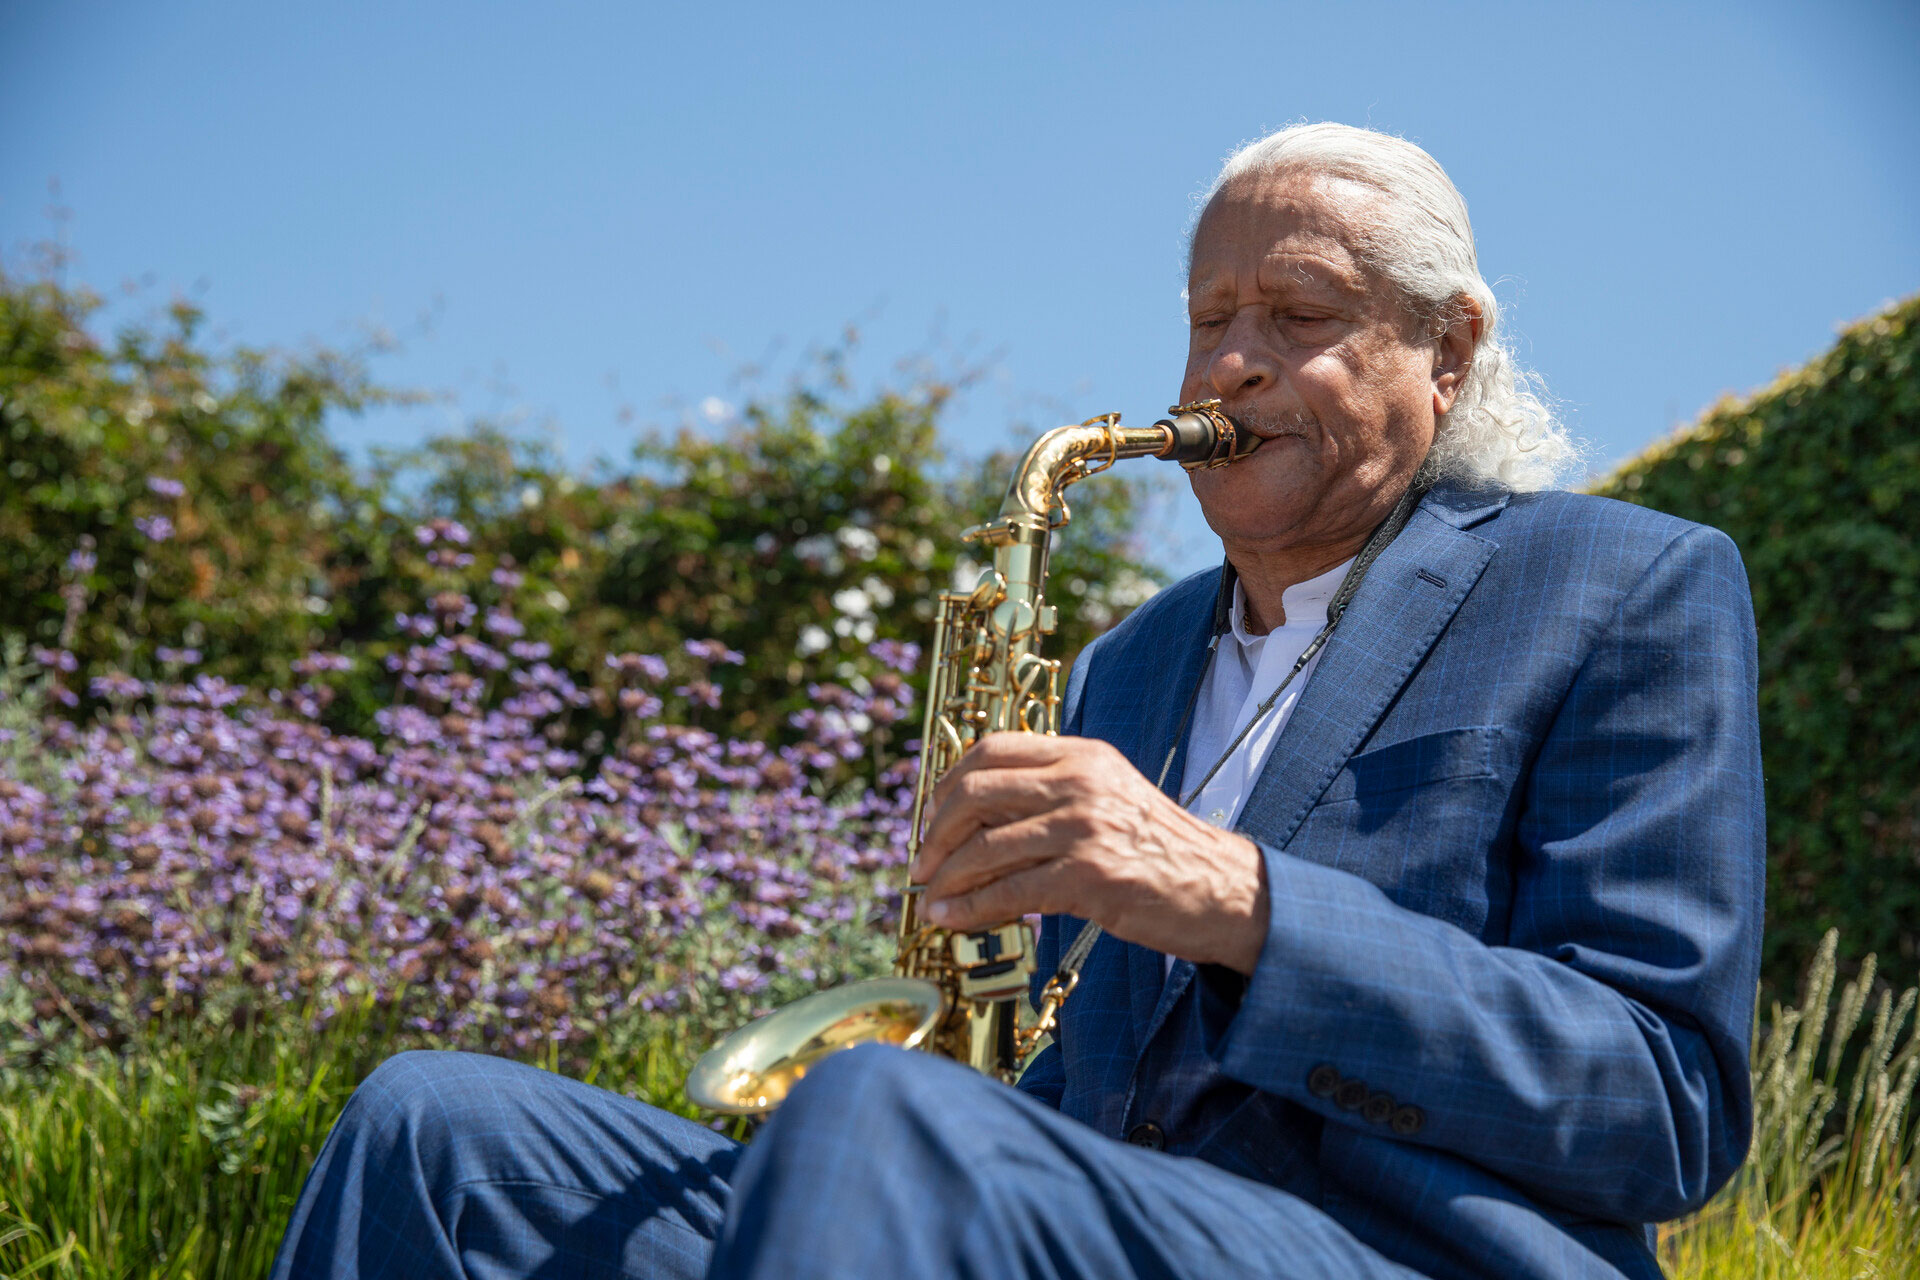 A man with white hair and a blue suit plays alto saxophone with foliage in the background.